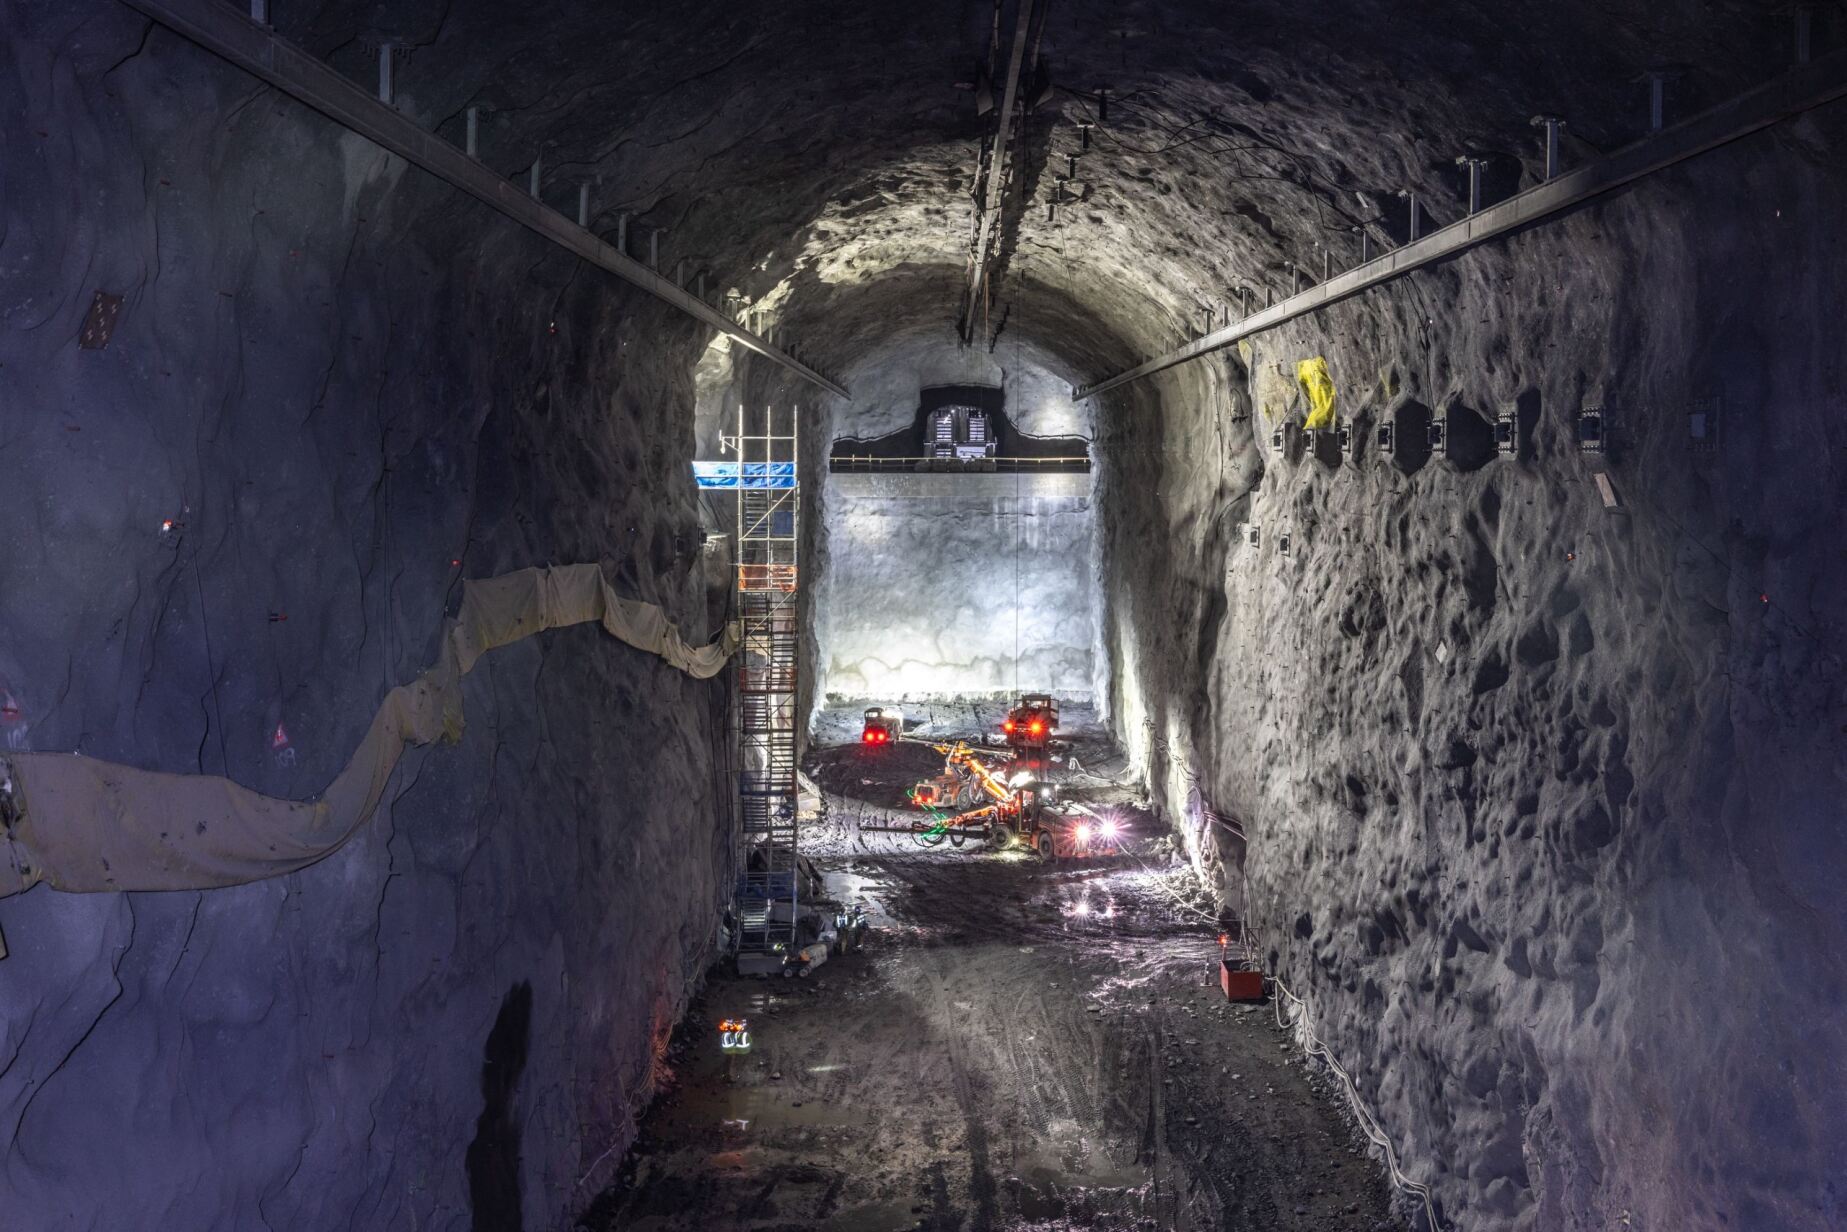 A tunnel is being constructed in the middle of a city.